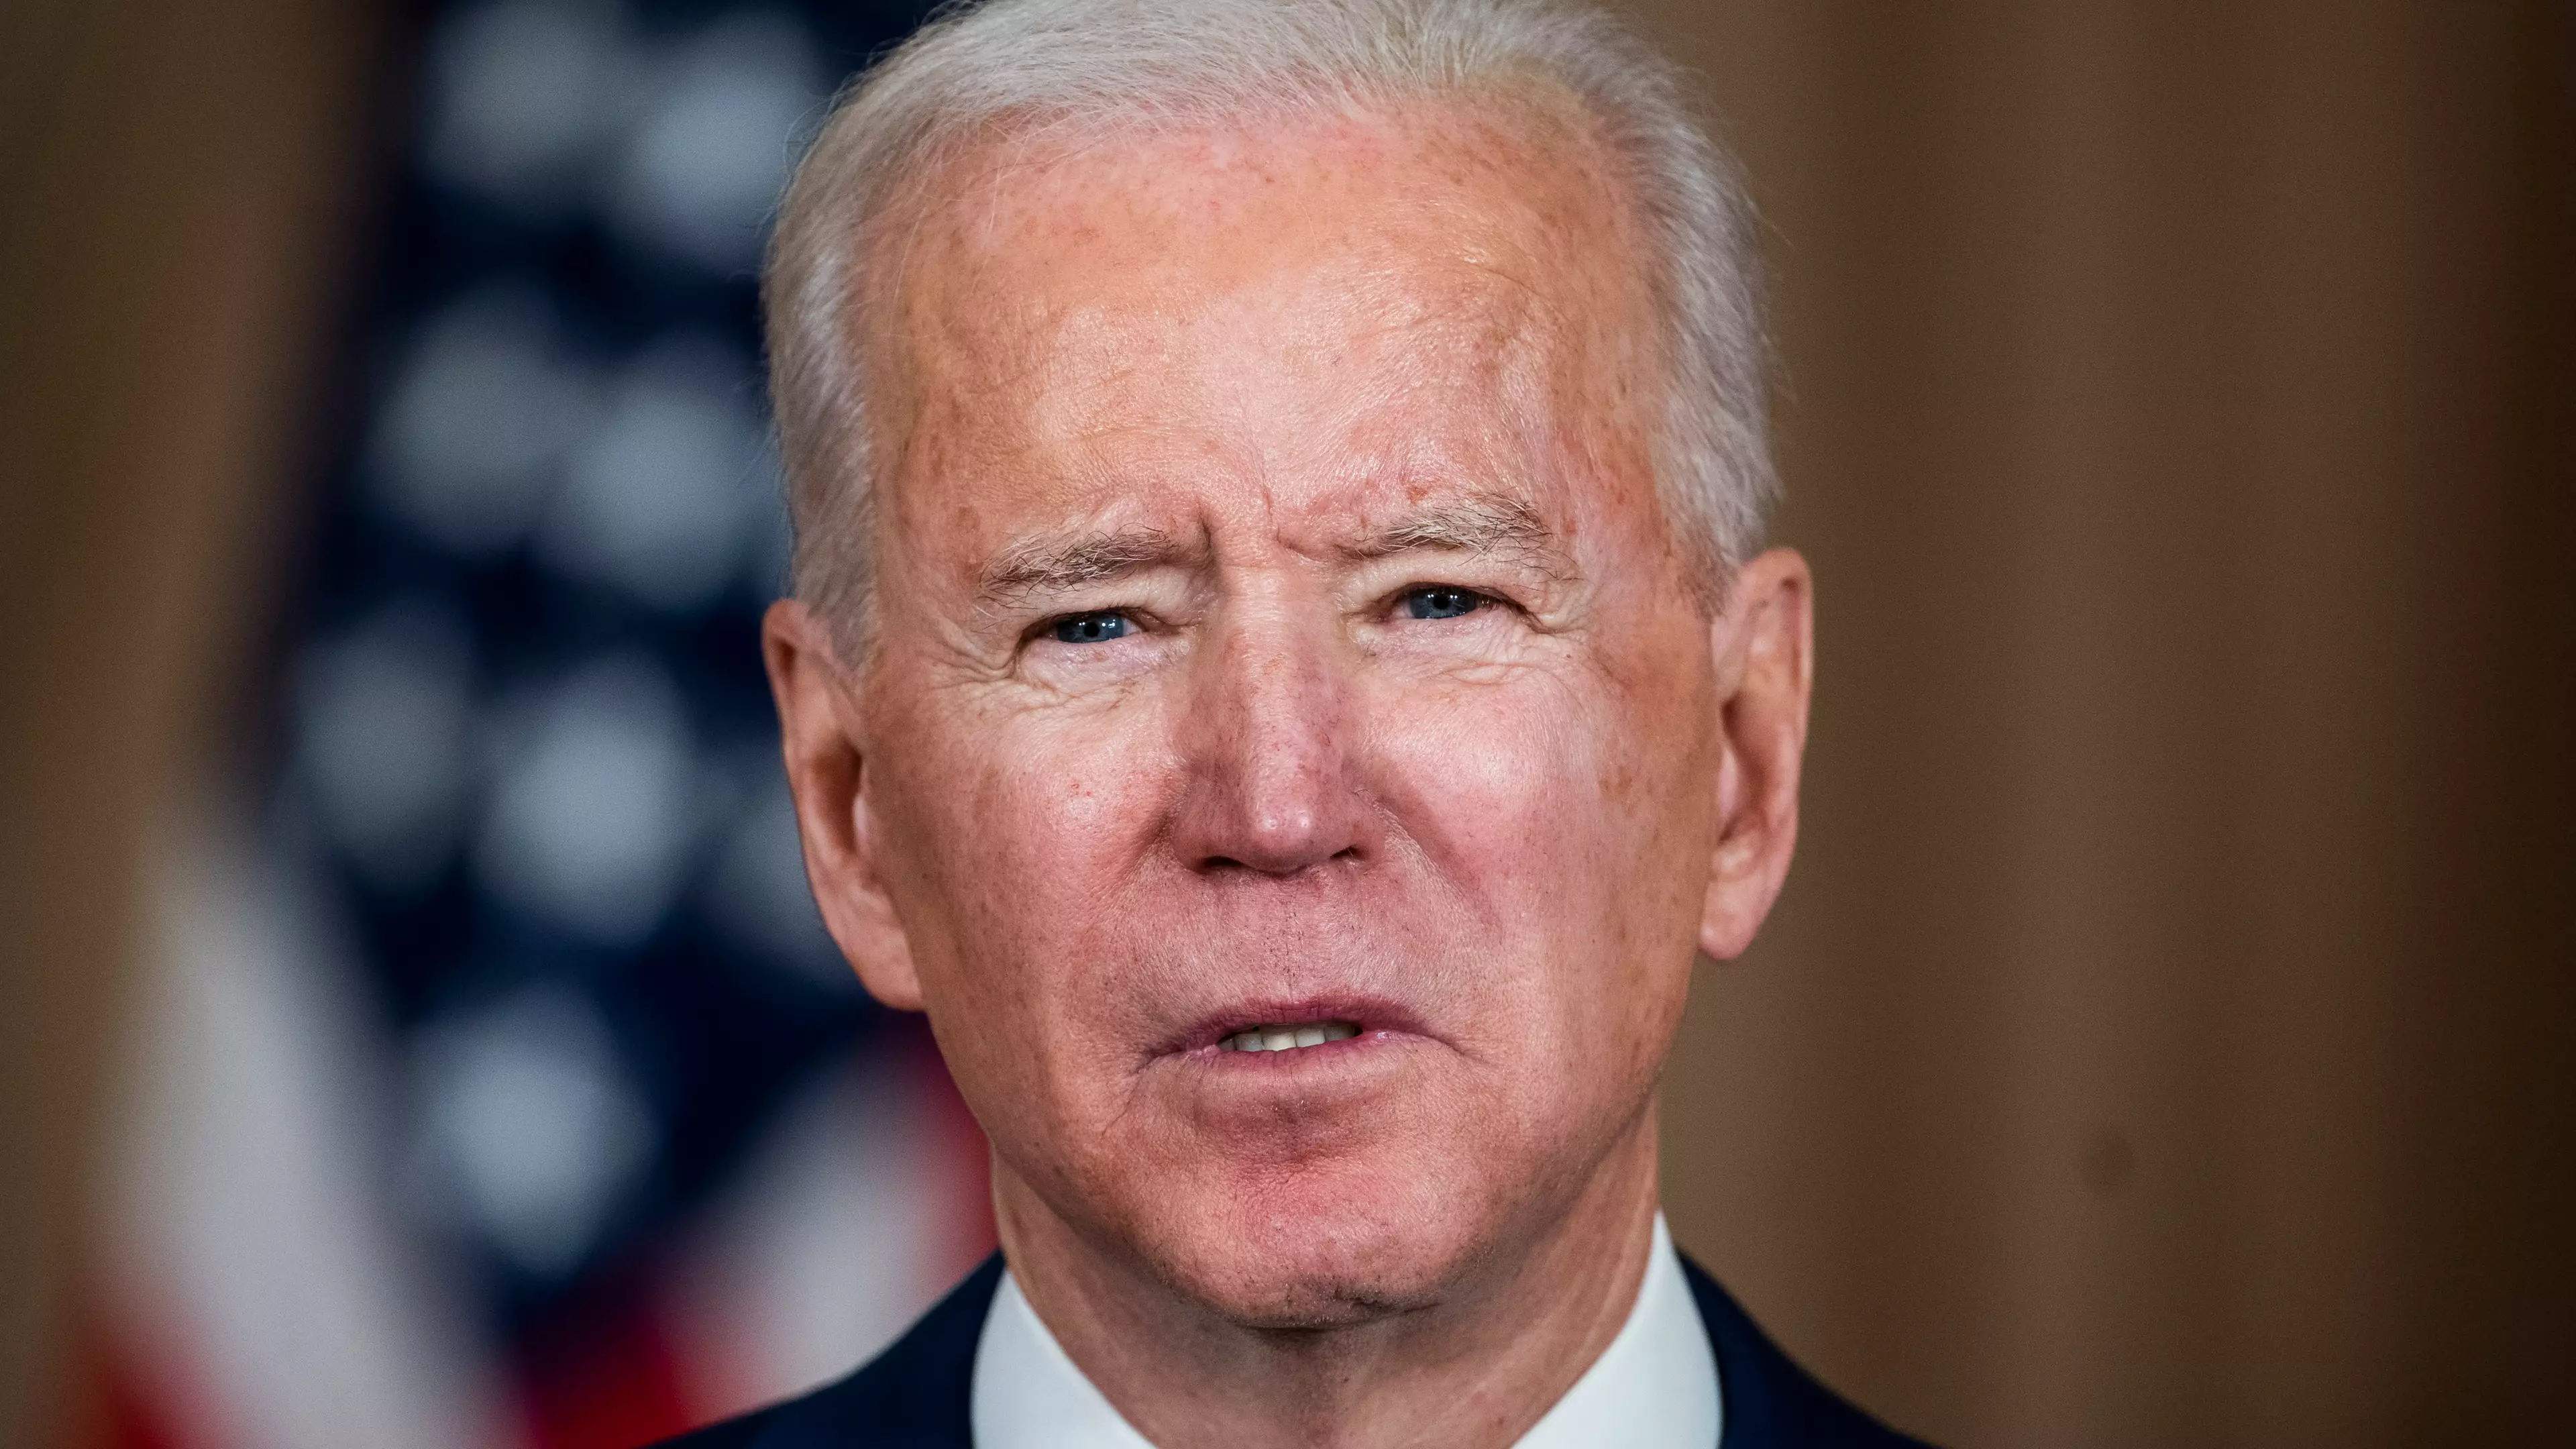 Joe Biden Tells Russia That The United States Will No Longer 'Roll Over'